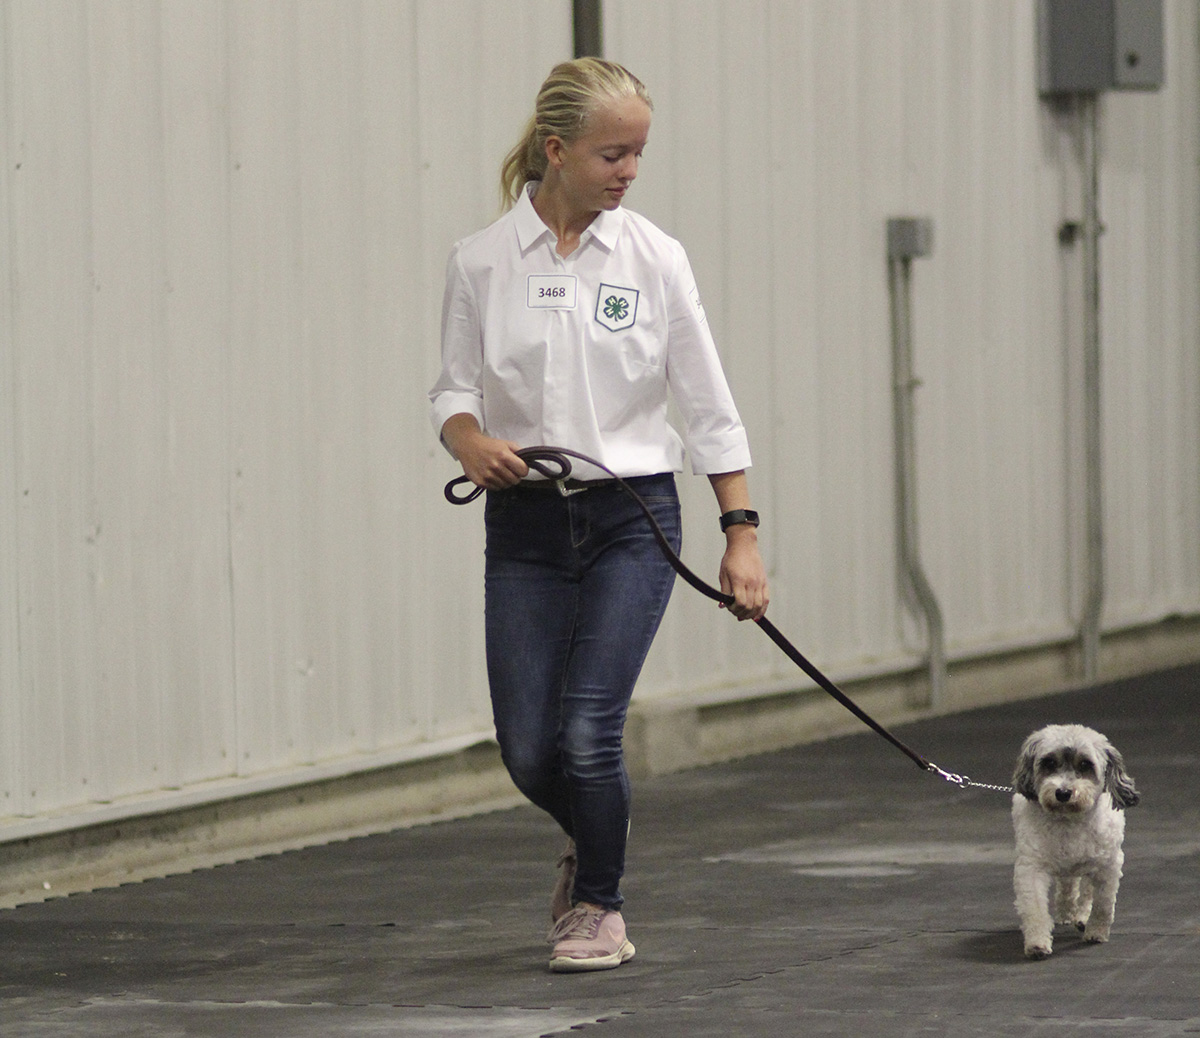 A member of the 4 On The Floor dog 4-H club for youth ages 9-18.